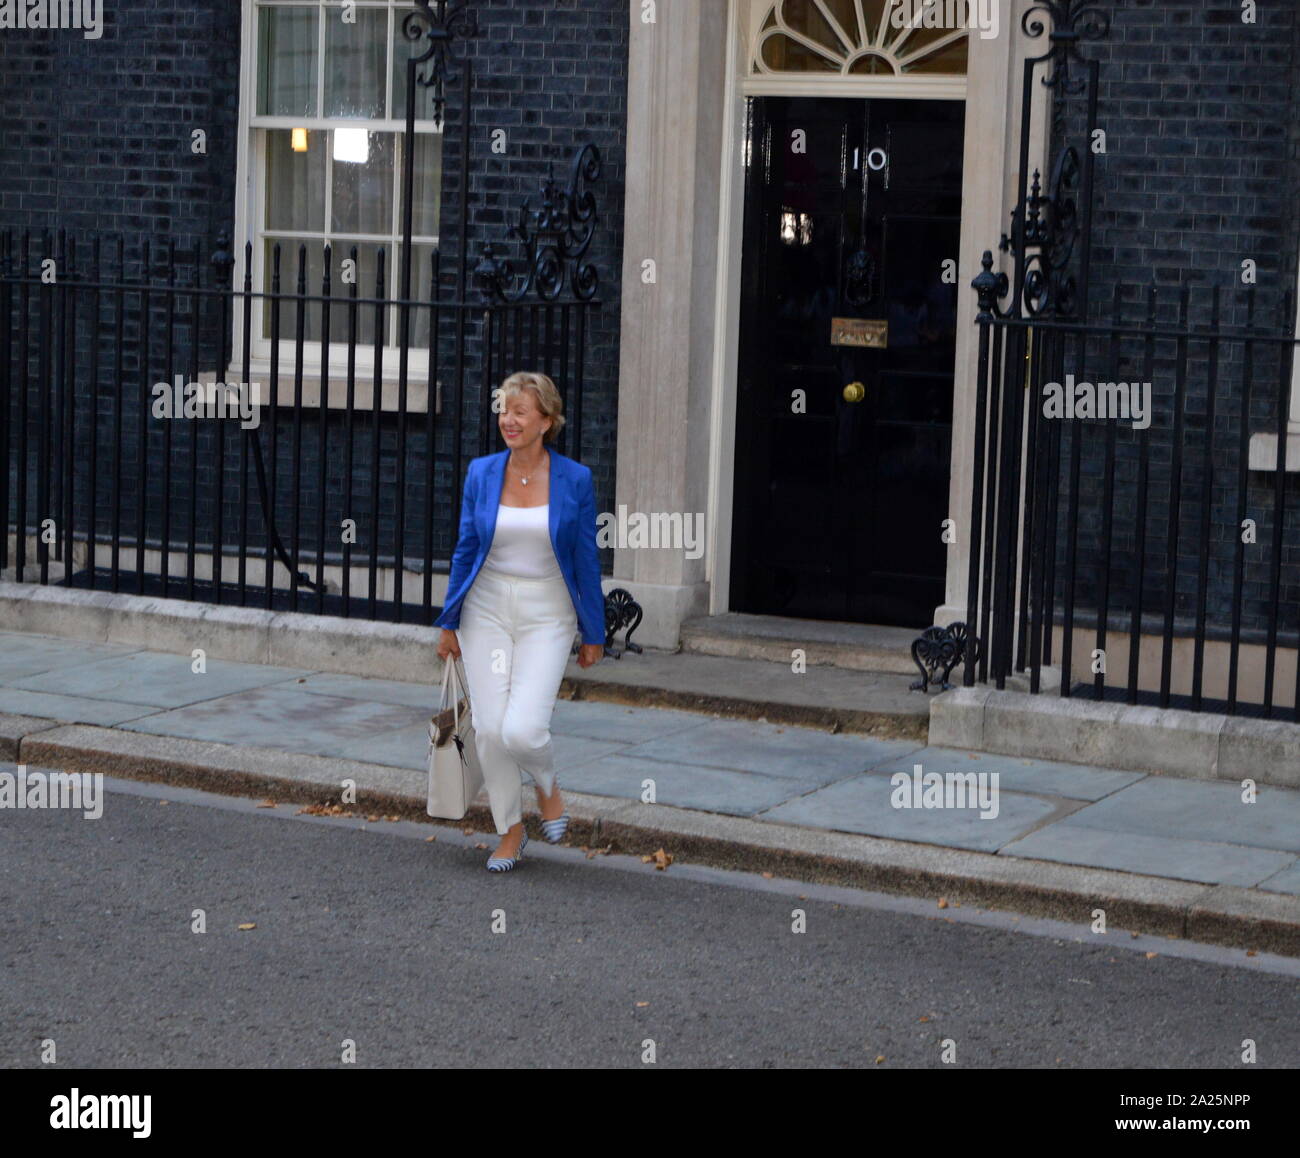 Andrea leadsom; british conservative party politician, arrives at number 10 downing street to be appointed as secretary of state for business, energy and industrial strategy, under boris johnson. Stock Photo